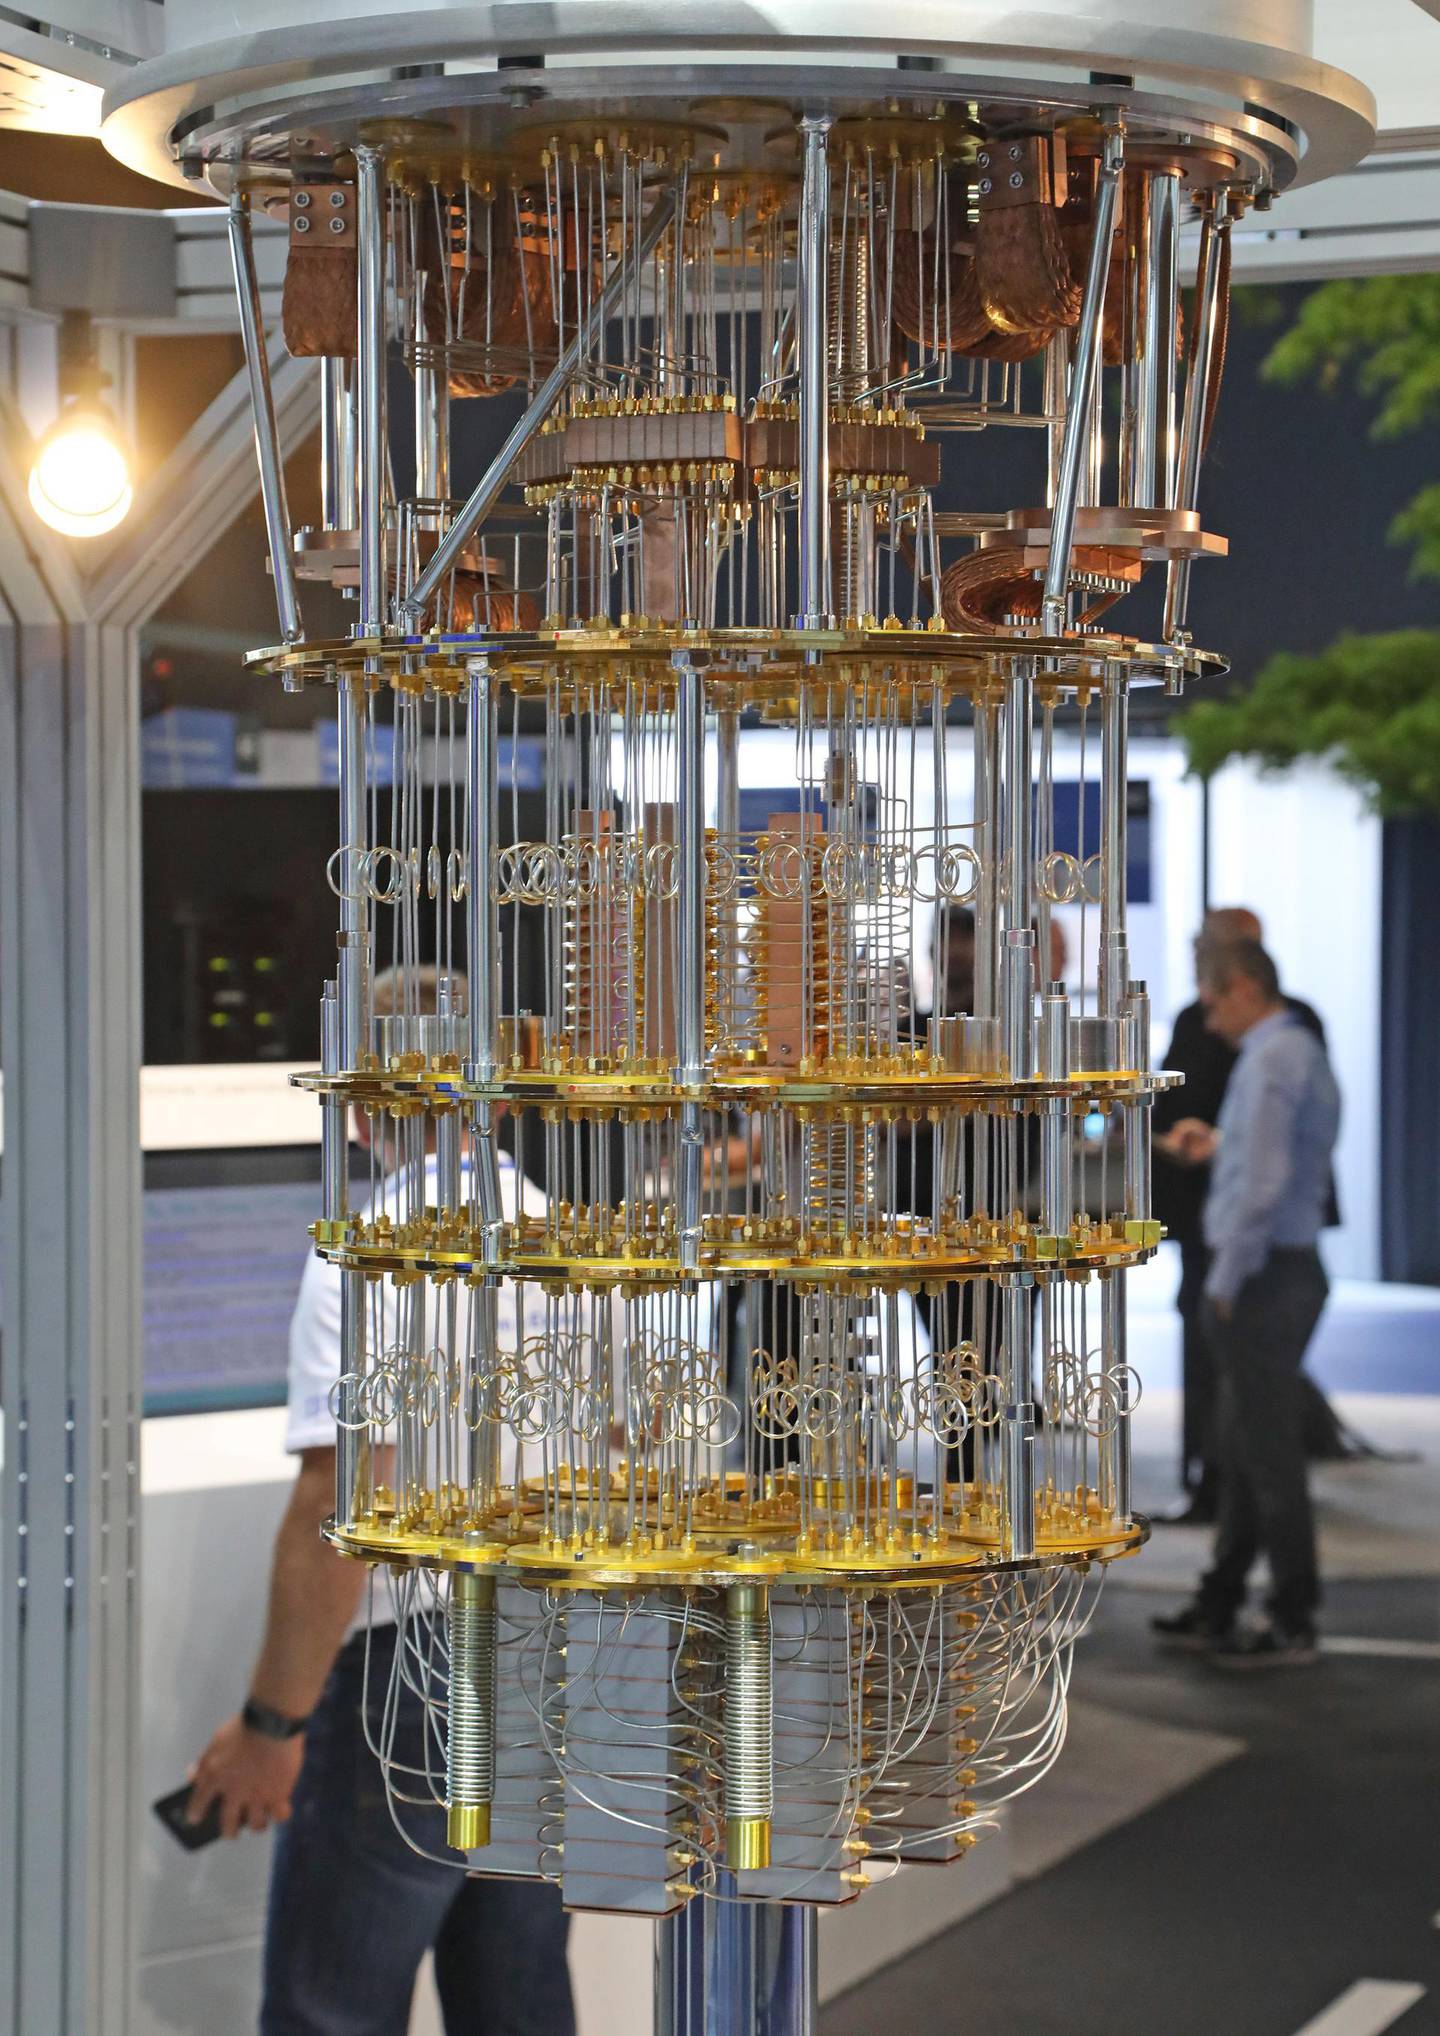 epa06800326 A 'quantum computer' is on display at the IBM booth at the CeBIT computer fair in Hanover, northern Germany, 11 June 2018. About 2,500 exhibitors at the fair present their latest developments in computing, intelligent automotive solutions, artificial intelligence and cloud based services from 11 to 15 June. The 2018 CeBIT in Hannover follows a new concept focusing more on events and conferences.  EPA-EFE/FOCKE STRANGMANN